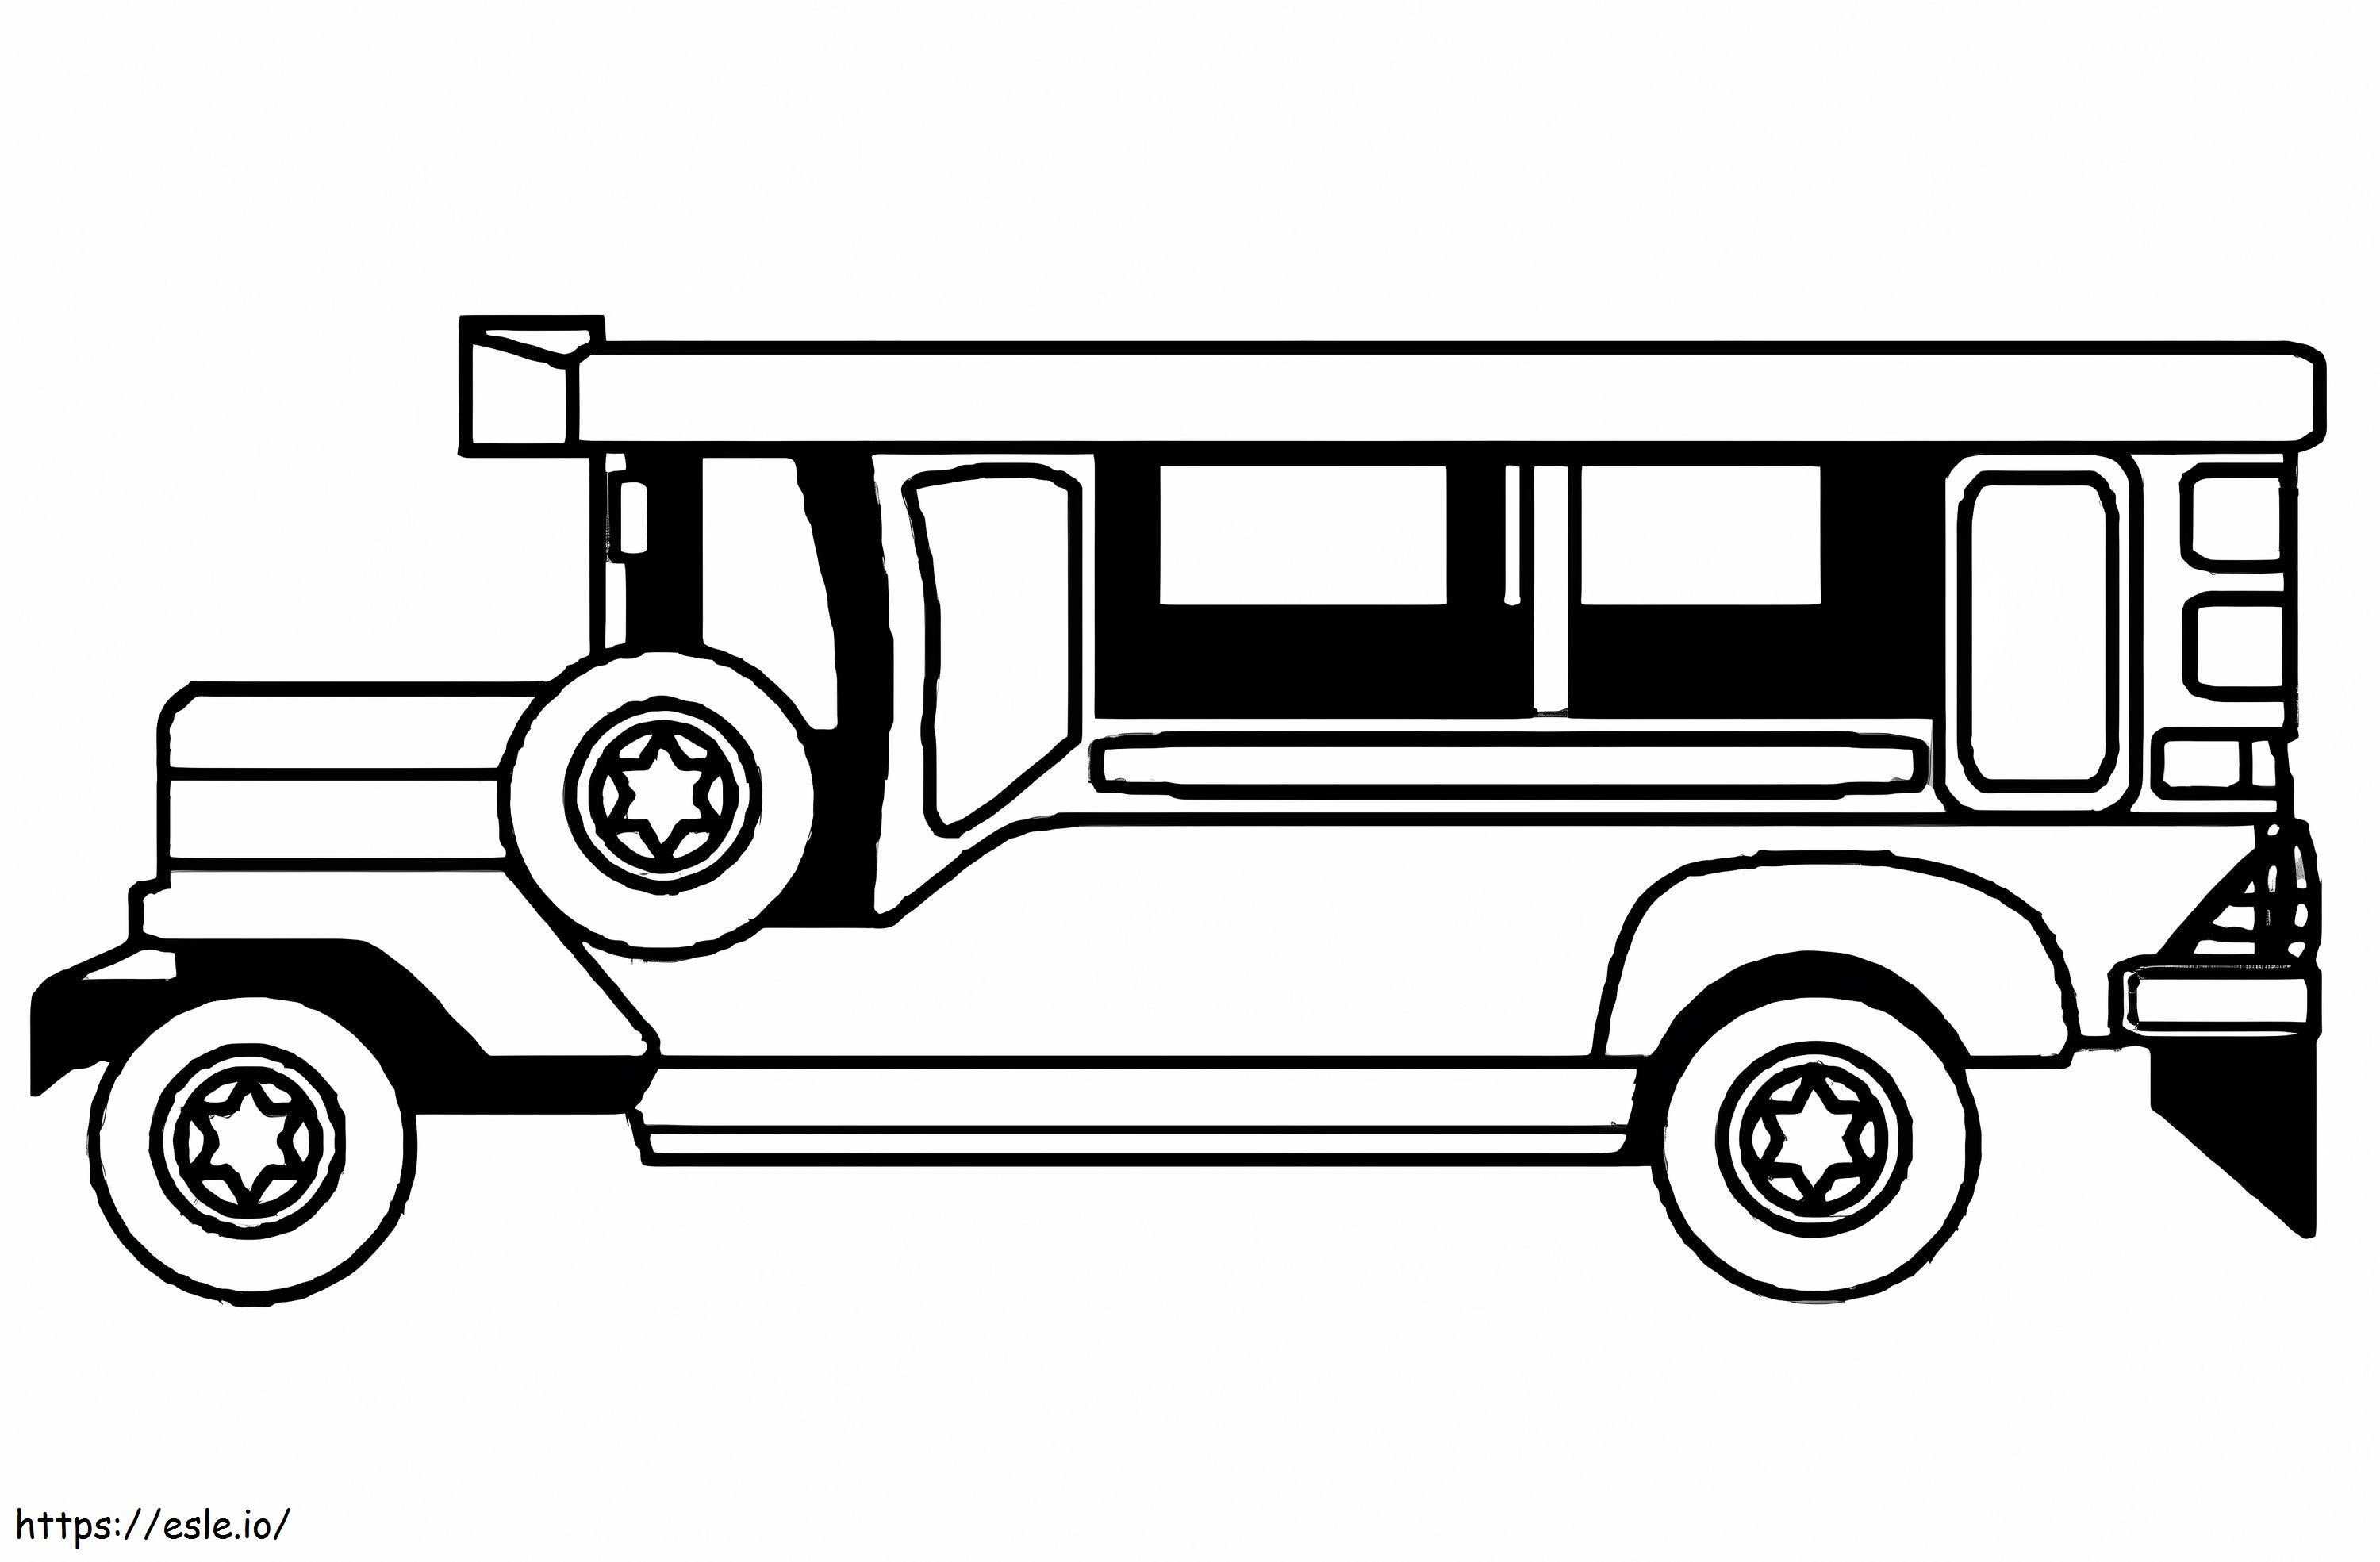 Free Jeepney coloring page